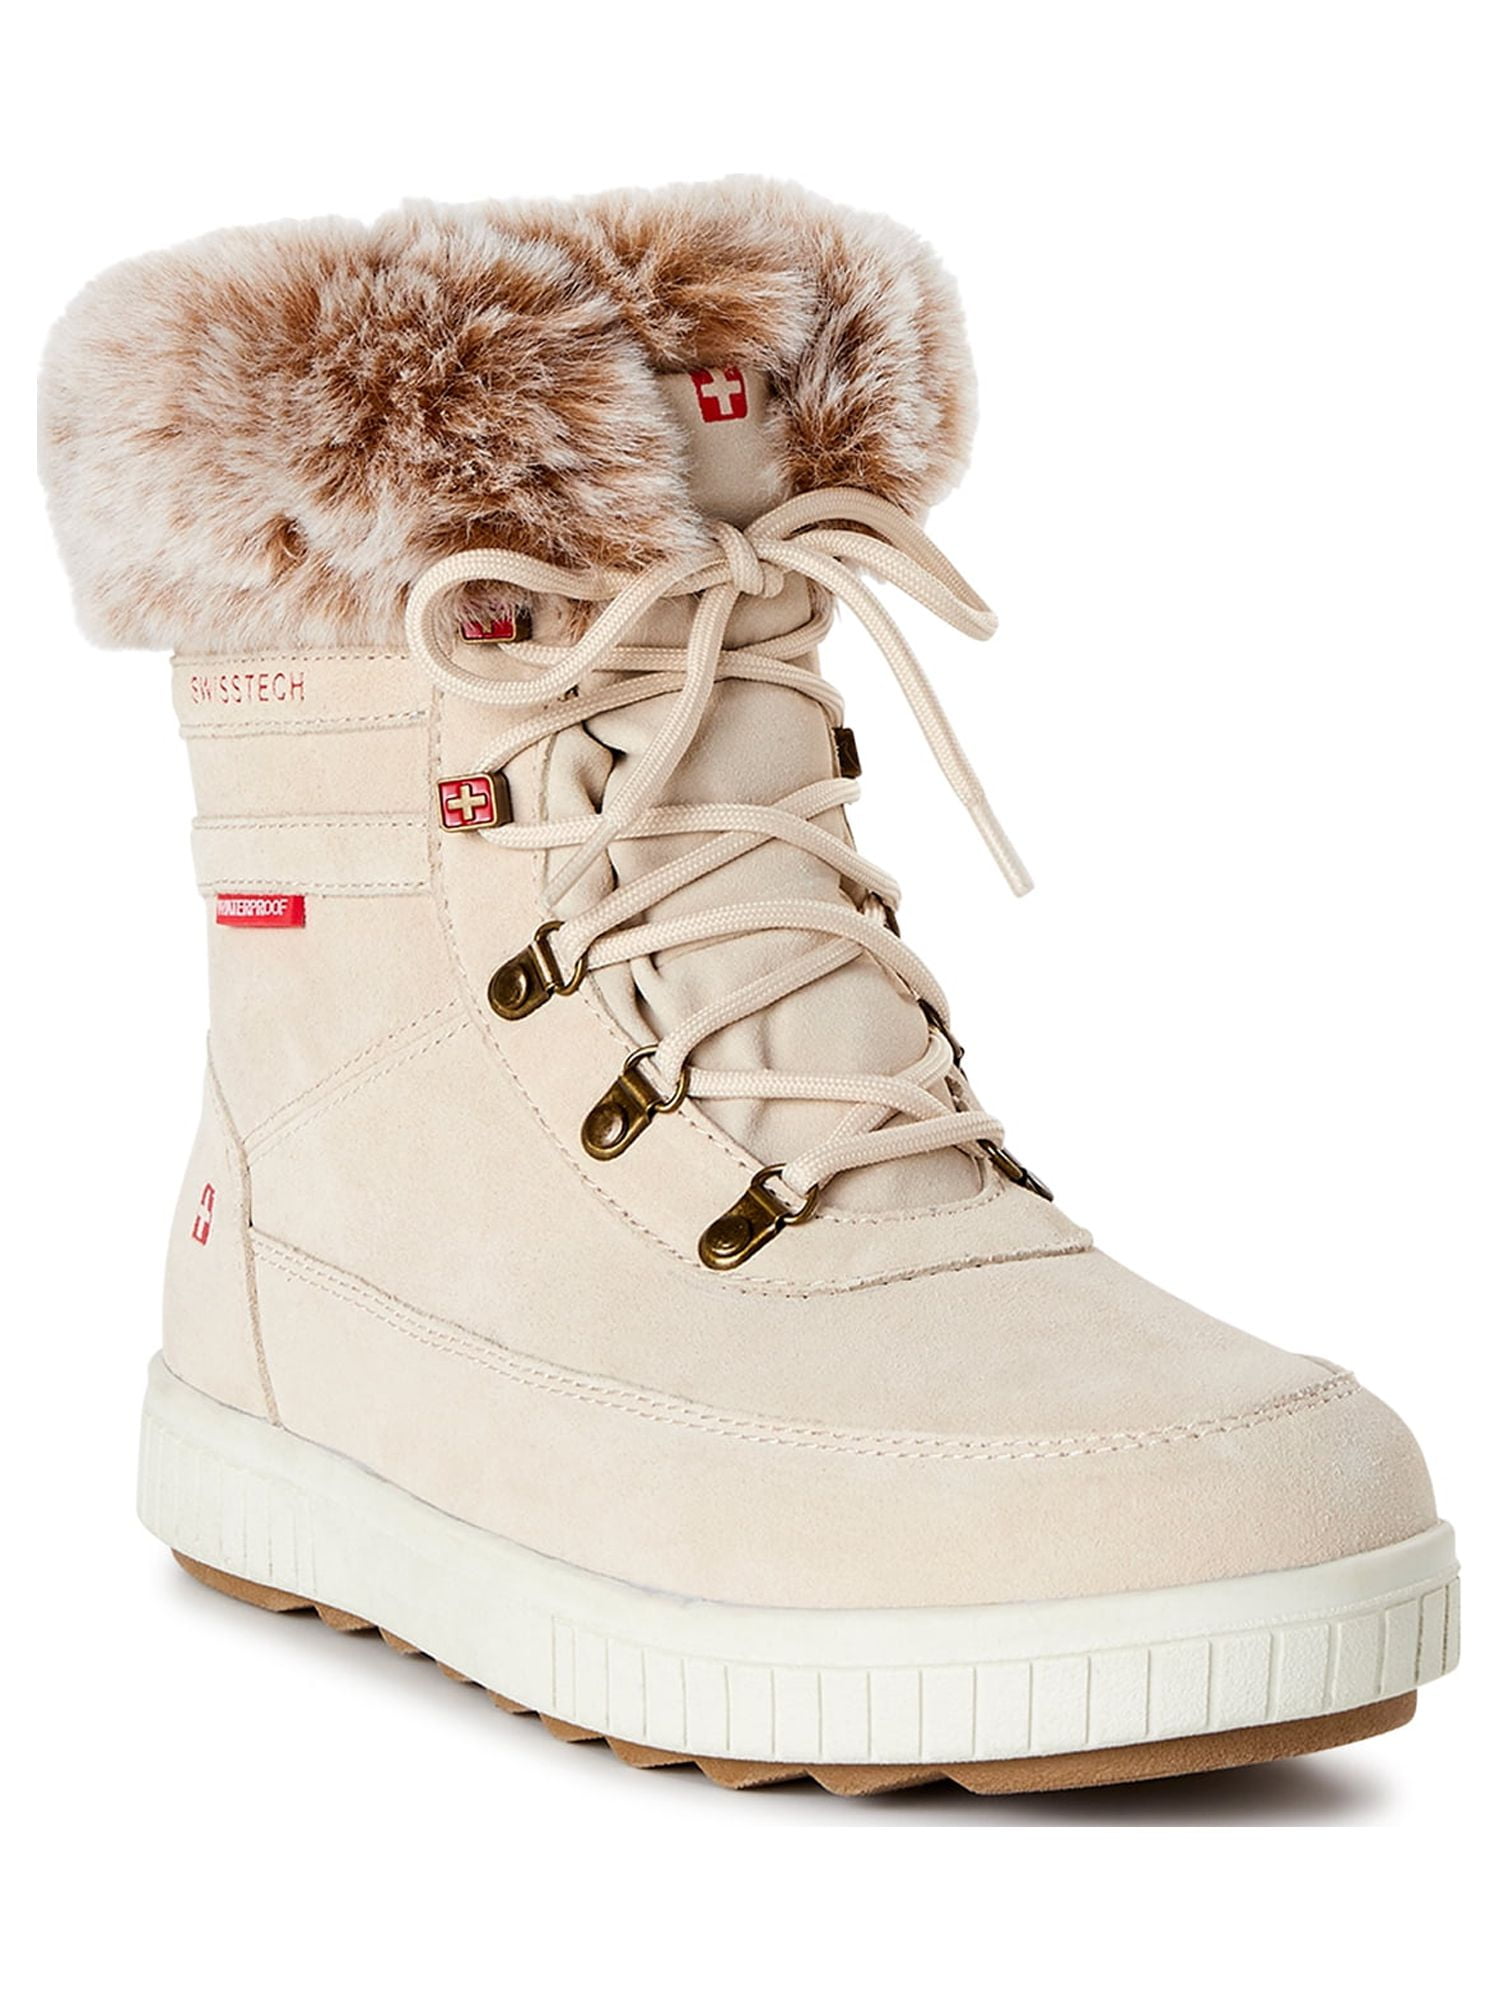 LV Boots ~  Fur sneakers, Pink suede boots, Suede combat boots